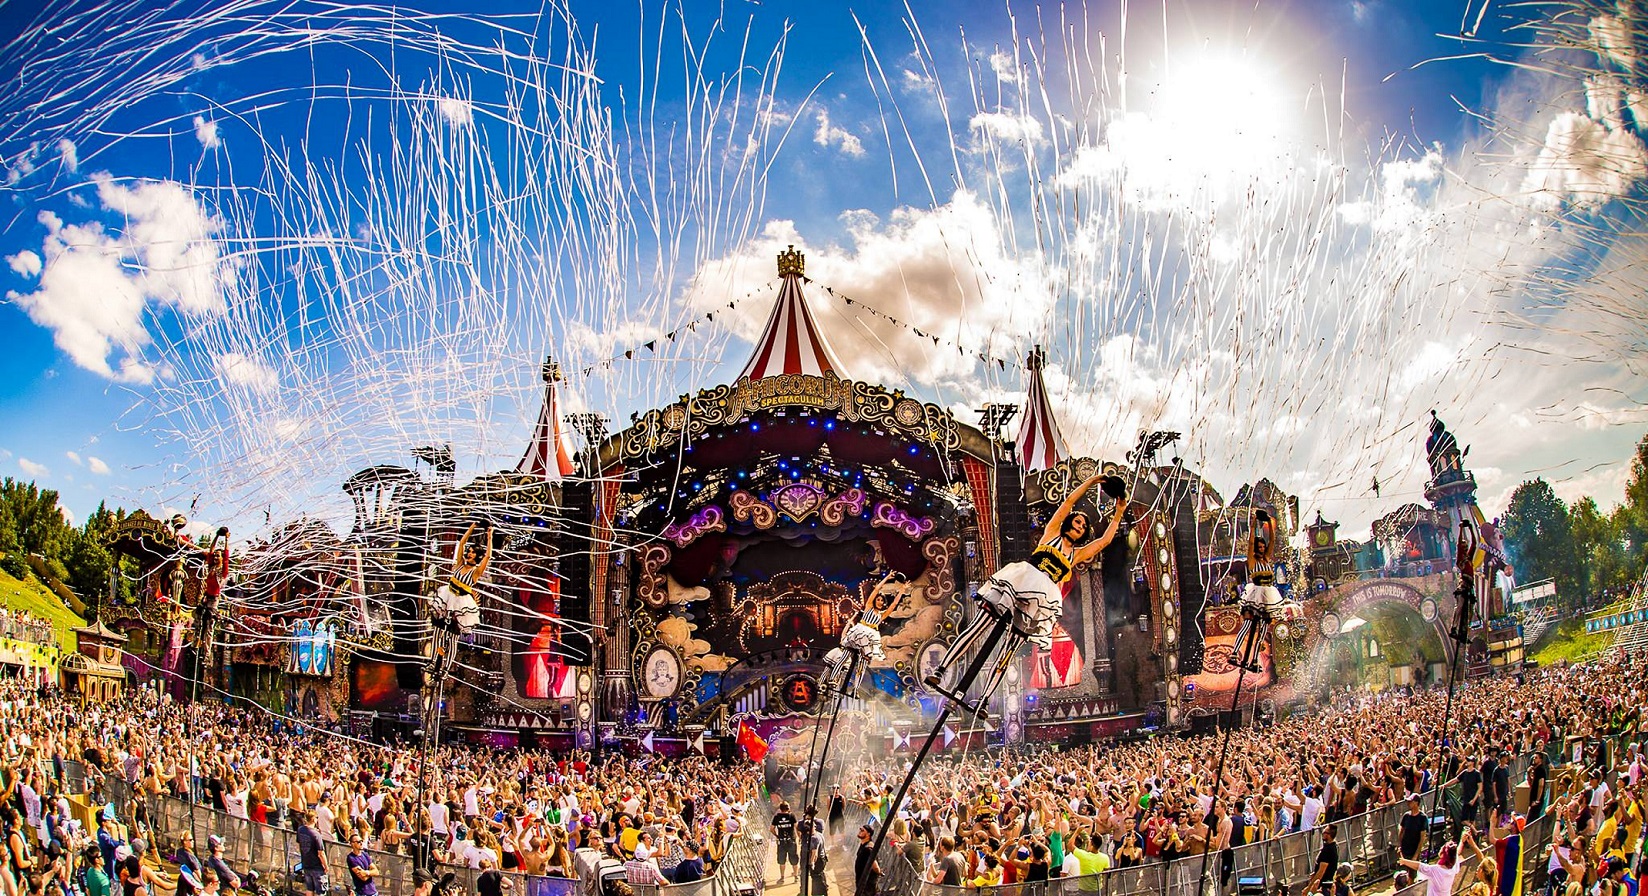 One of the world’s largest music festivals takes place in sonic Boom